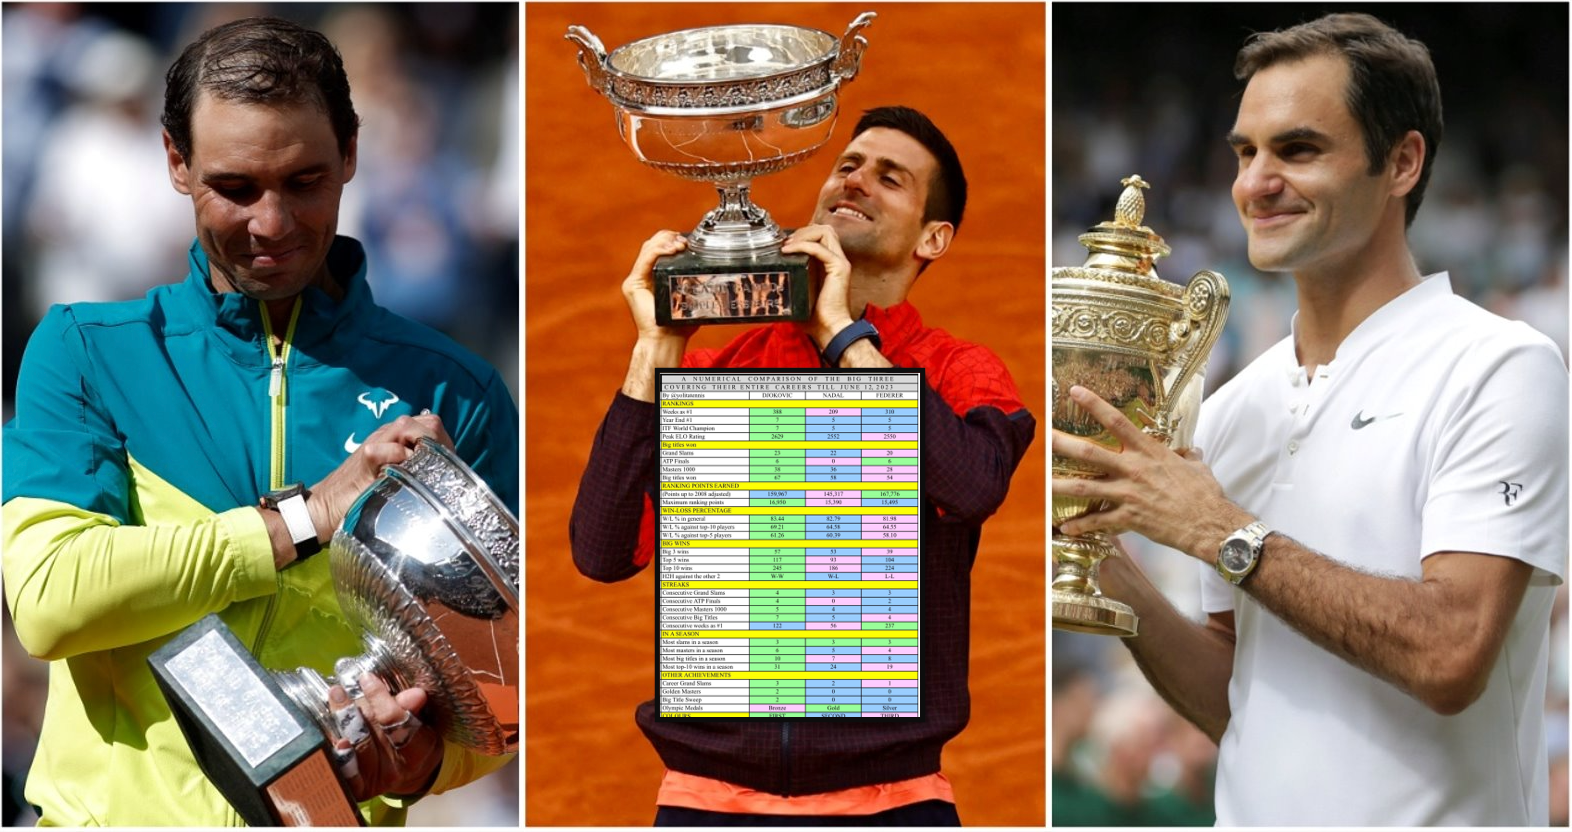 Who is the greatest male tennis player ever: Djokovic, Nadal, or Federer?